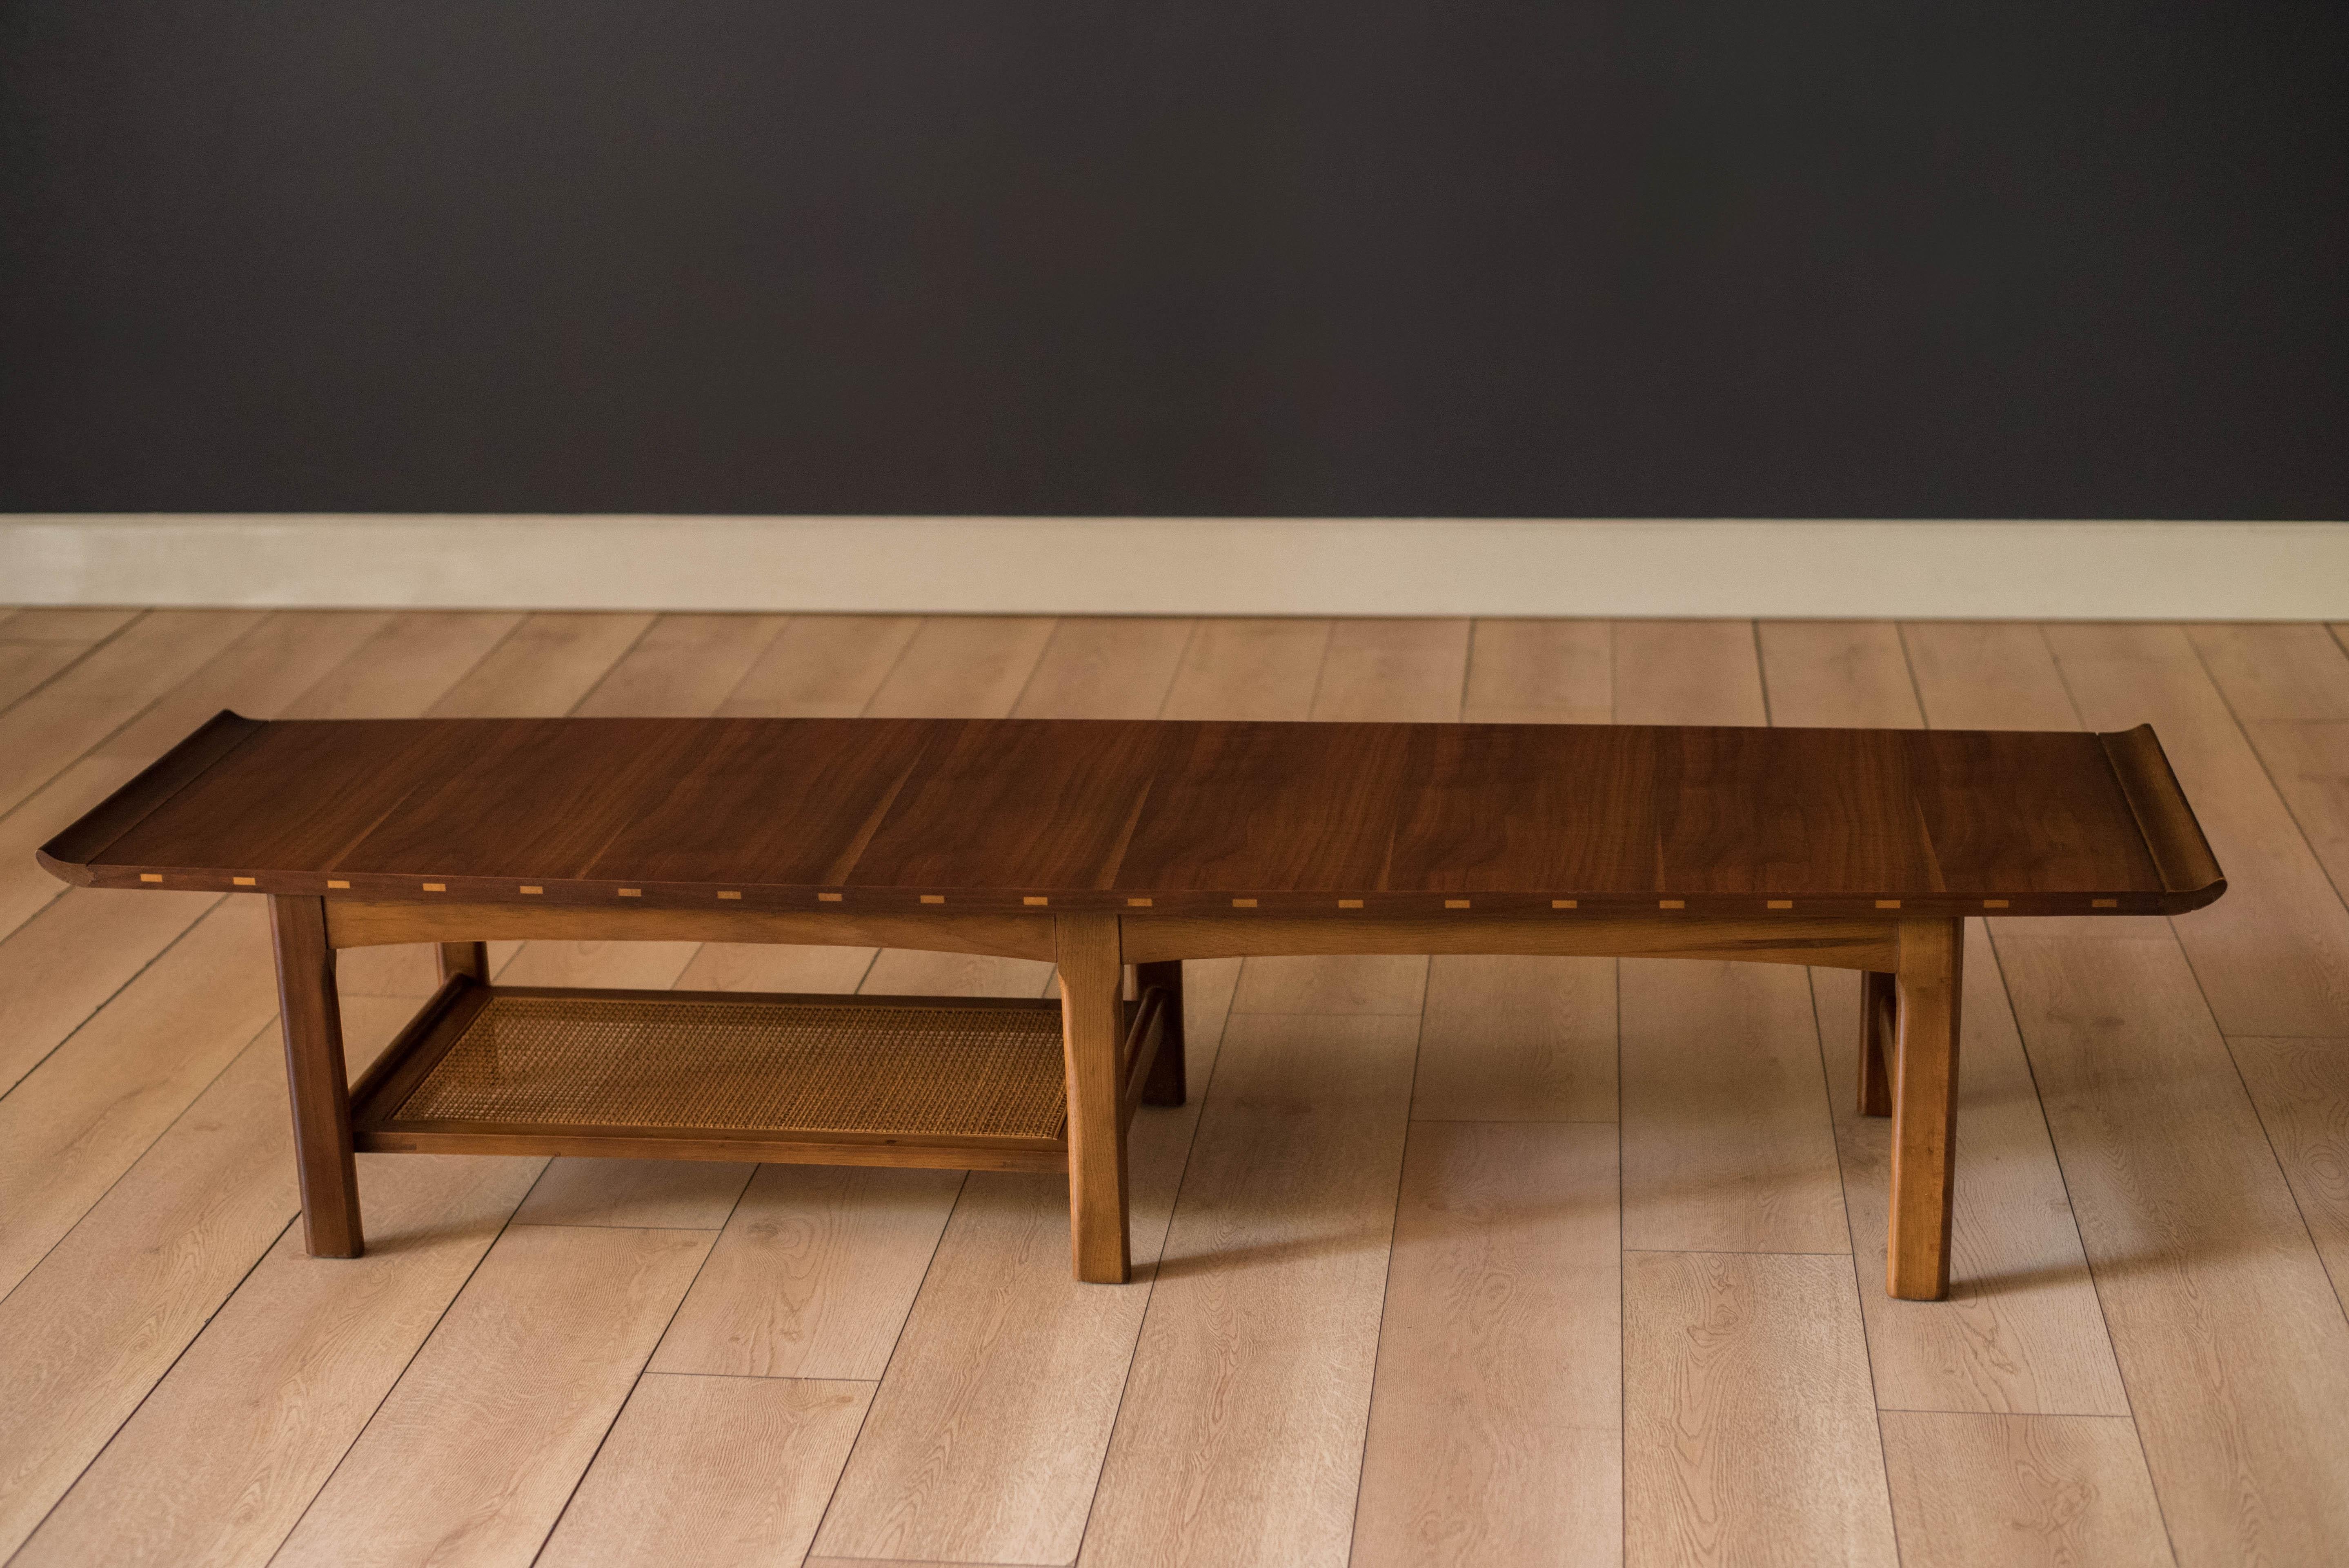 American Vintage Walnut and Oak Surfboard Coffee Table Bench by Lane Furniture Co.